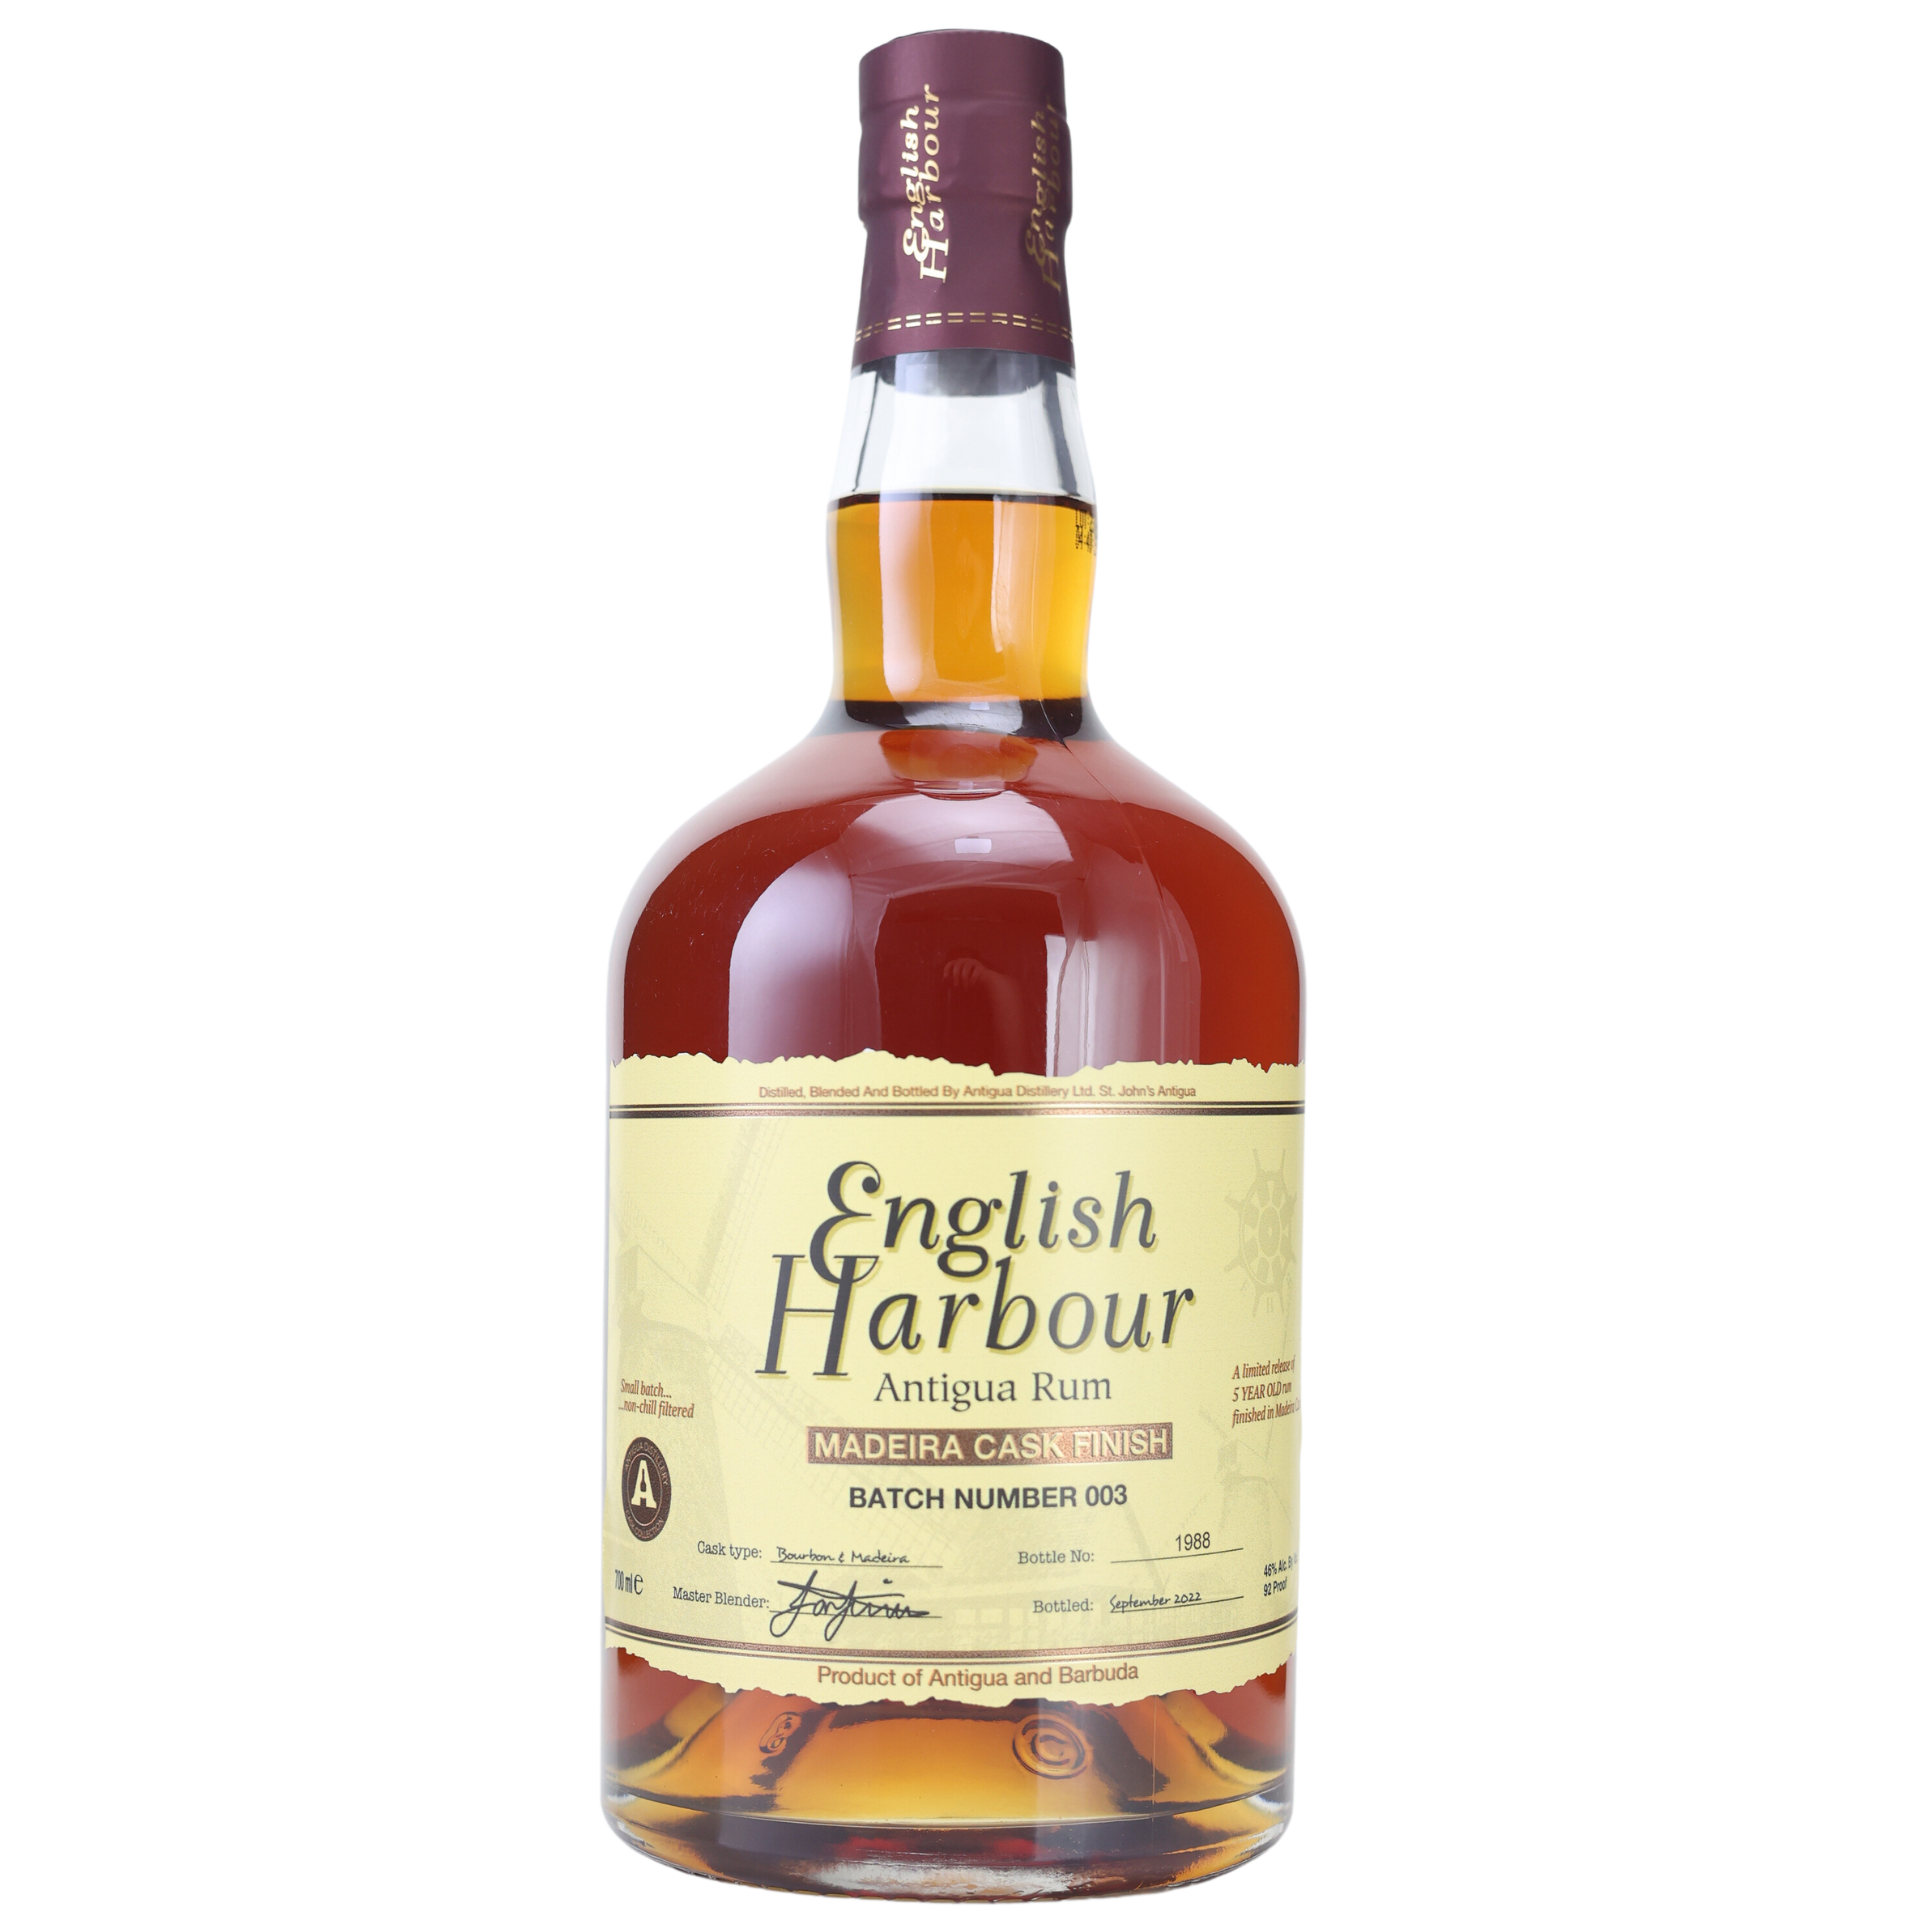 English Harbour Madeira Cask Finish Rum 46% 0,7l